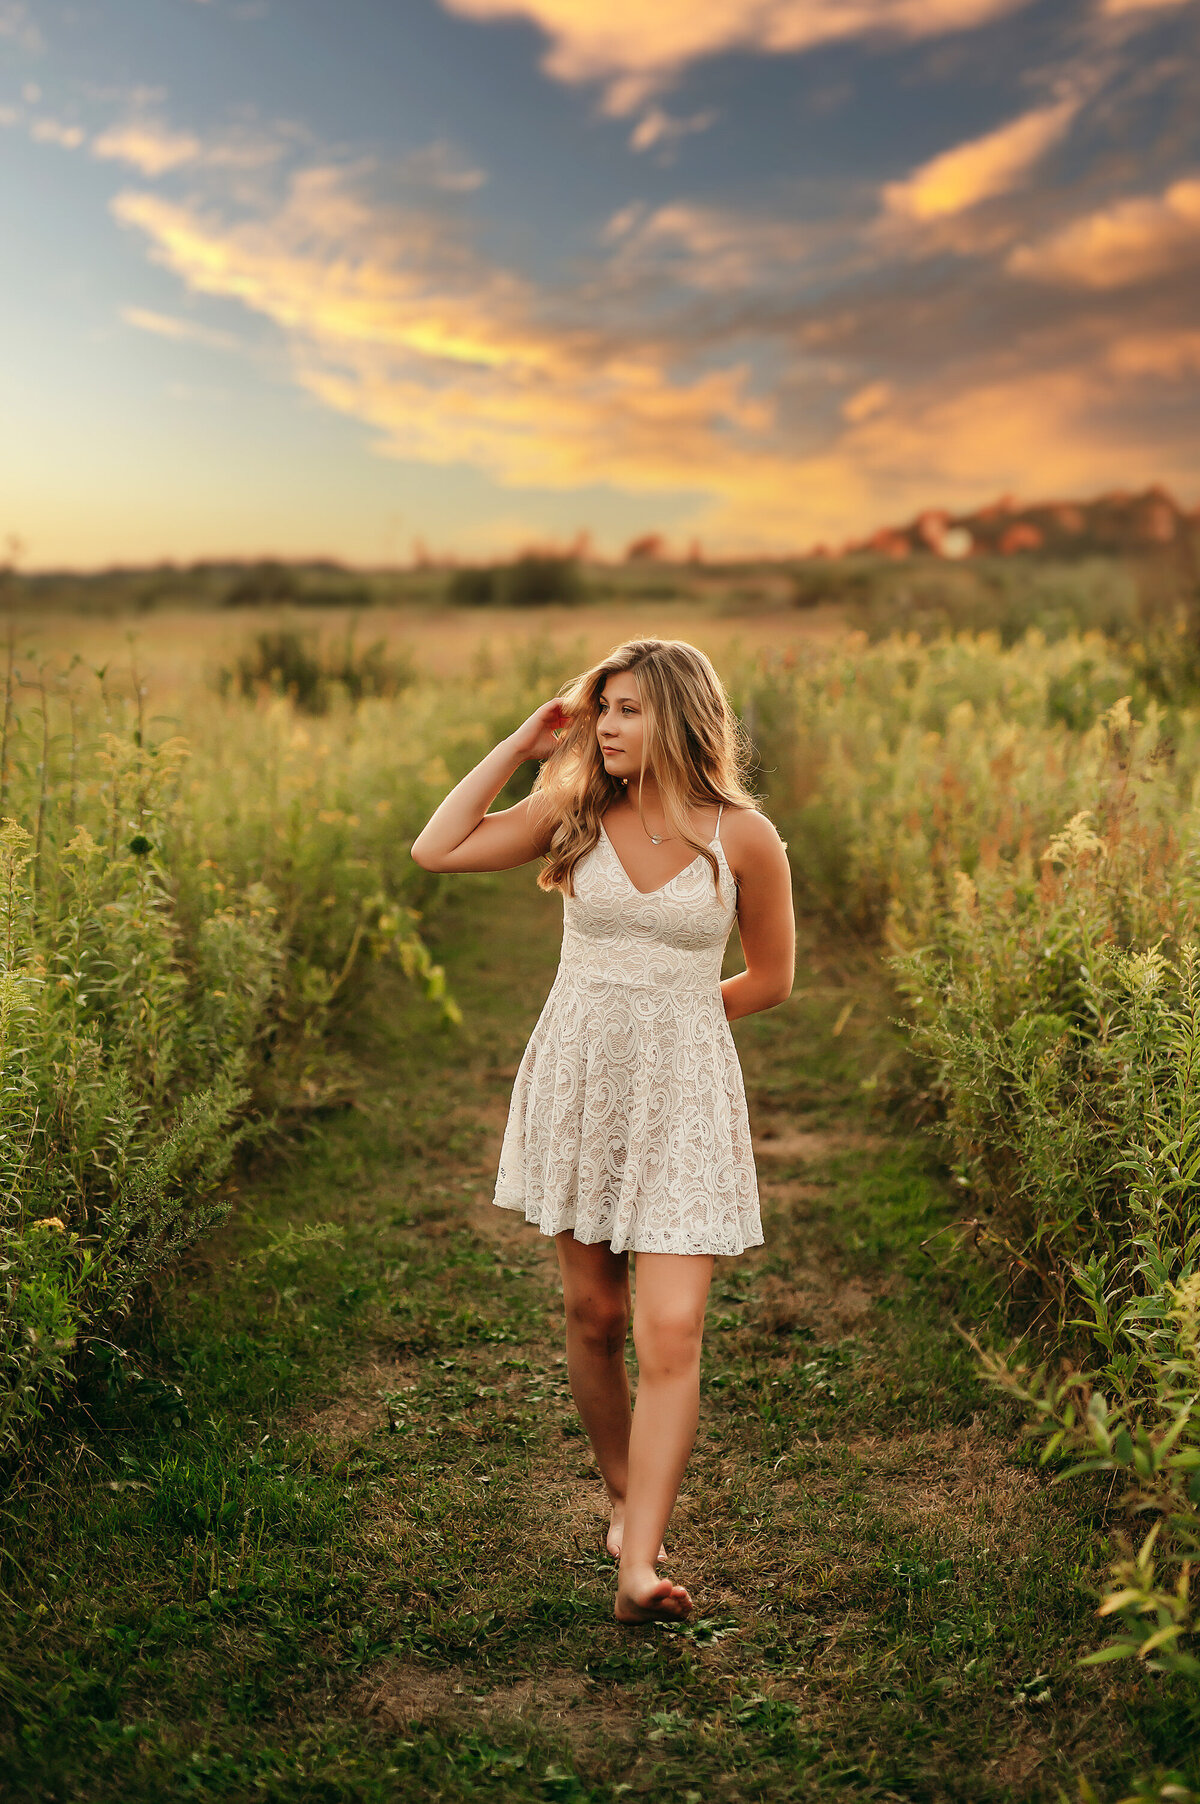 A young lady from New Berlin West High School wears a white sundress and walks barefoot through a field in Minooka Park for her senior photoshoot.